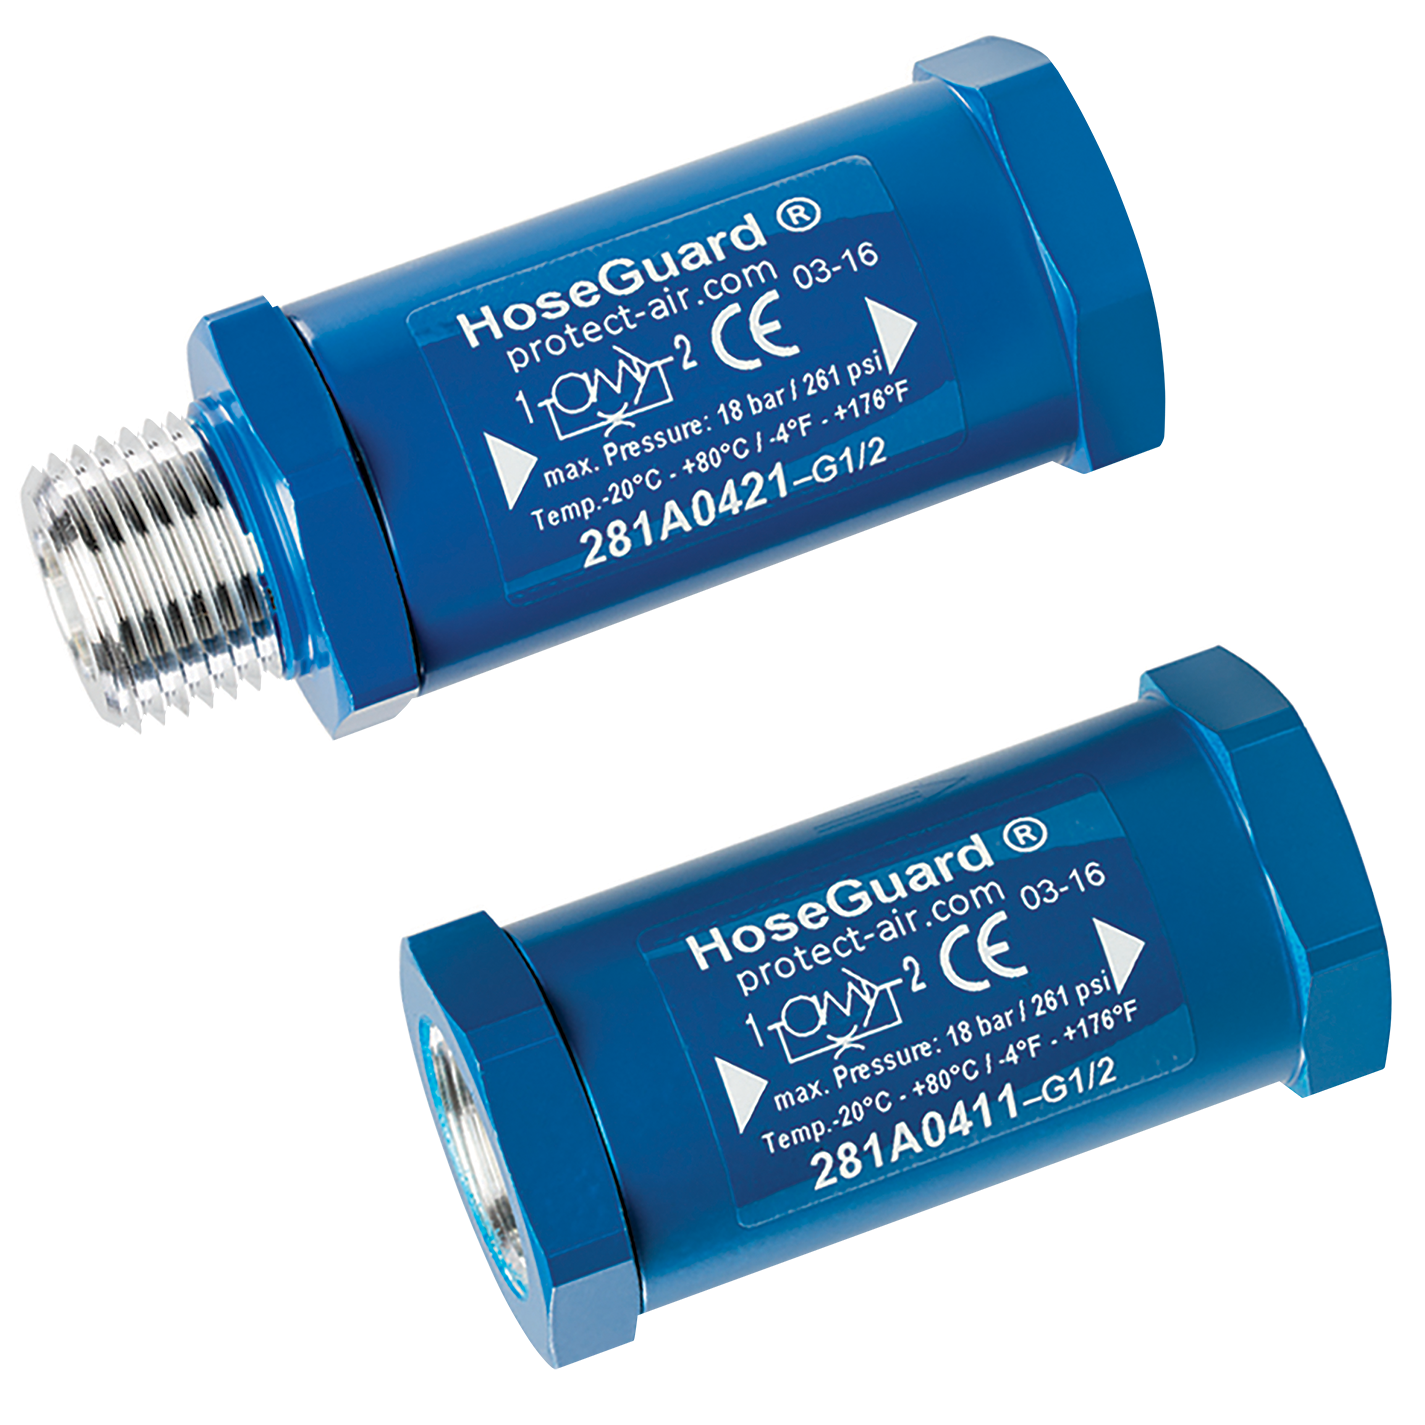 HOSEGUARD AIRFUSE 1/4" BSPP MALE/FEM